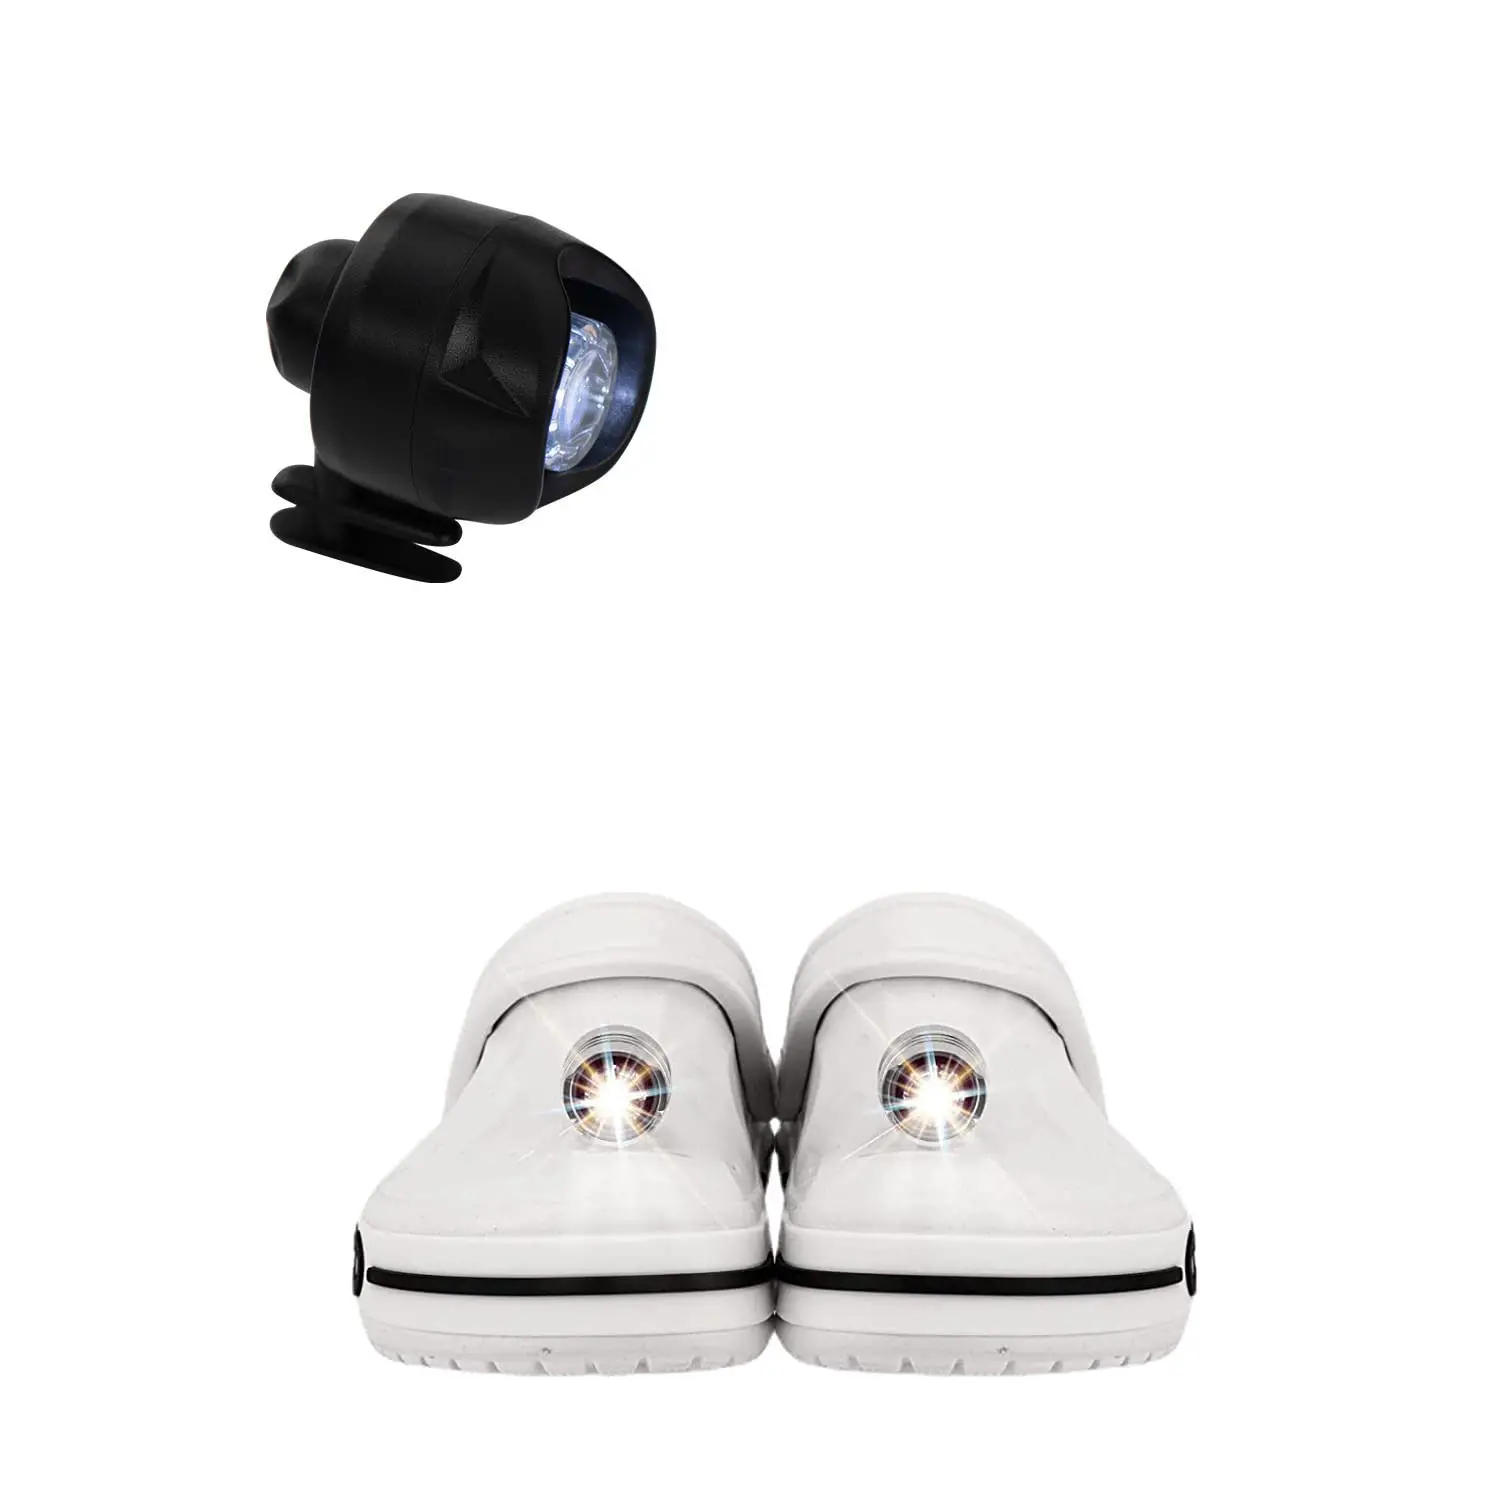 Headlights for Clogs Croc Shoes Waterproof Shoes Lights Charms for Dog Walking Handy Camping